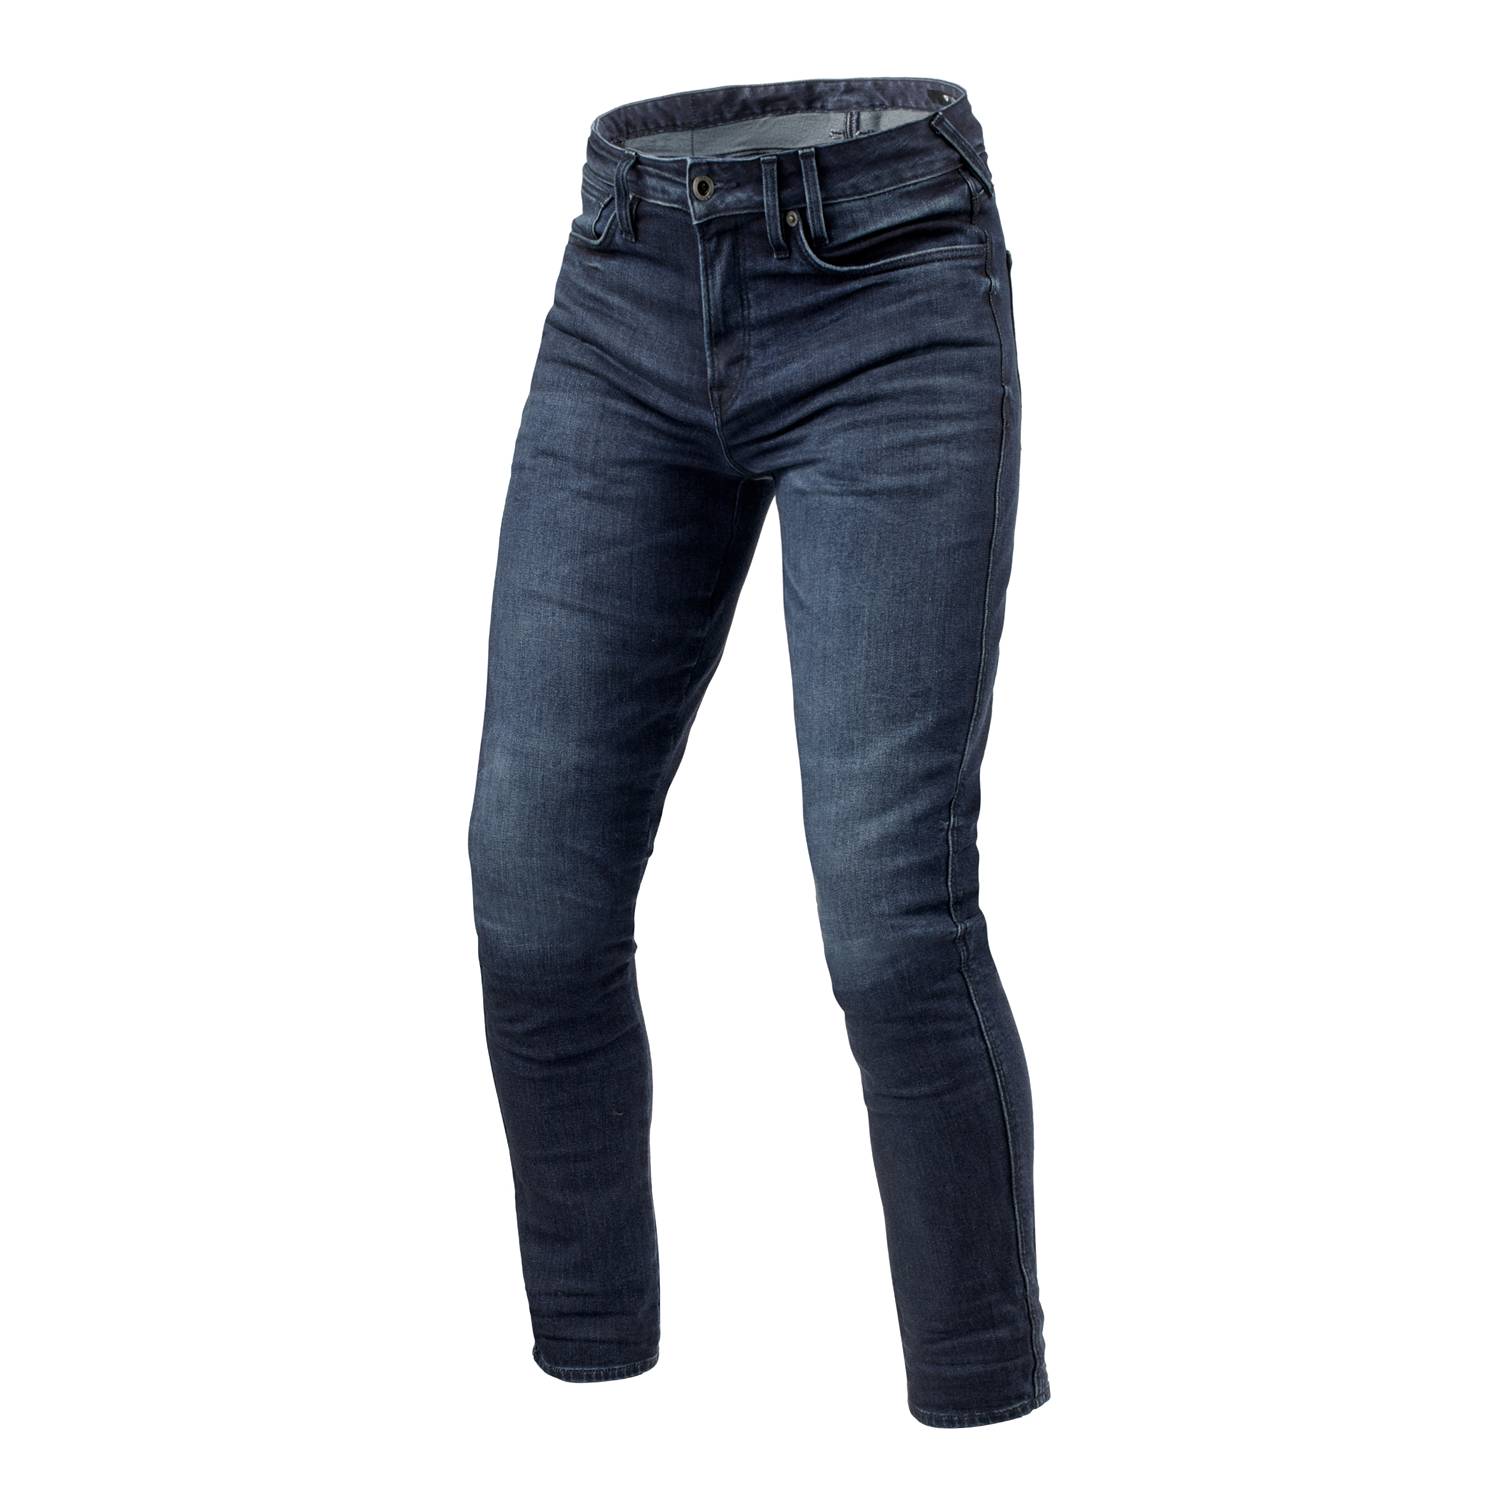 Image of REV'IT! Jeans Carlin SK Dark Blue Used L34 Motorcycle Jeans Size L34/W33 ID 8700001376419